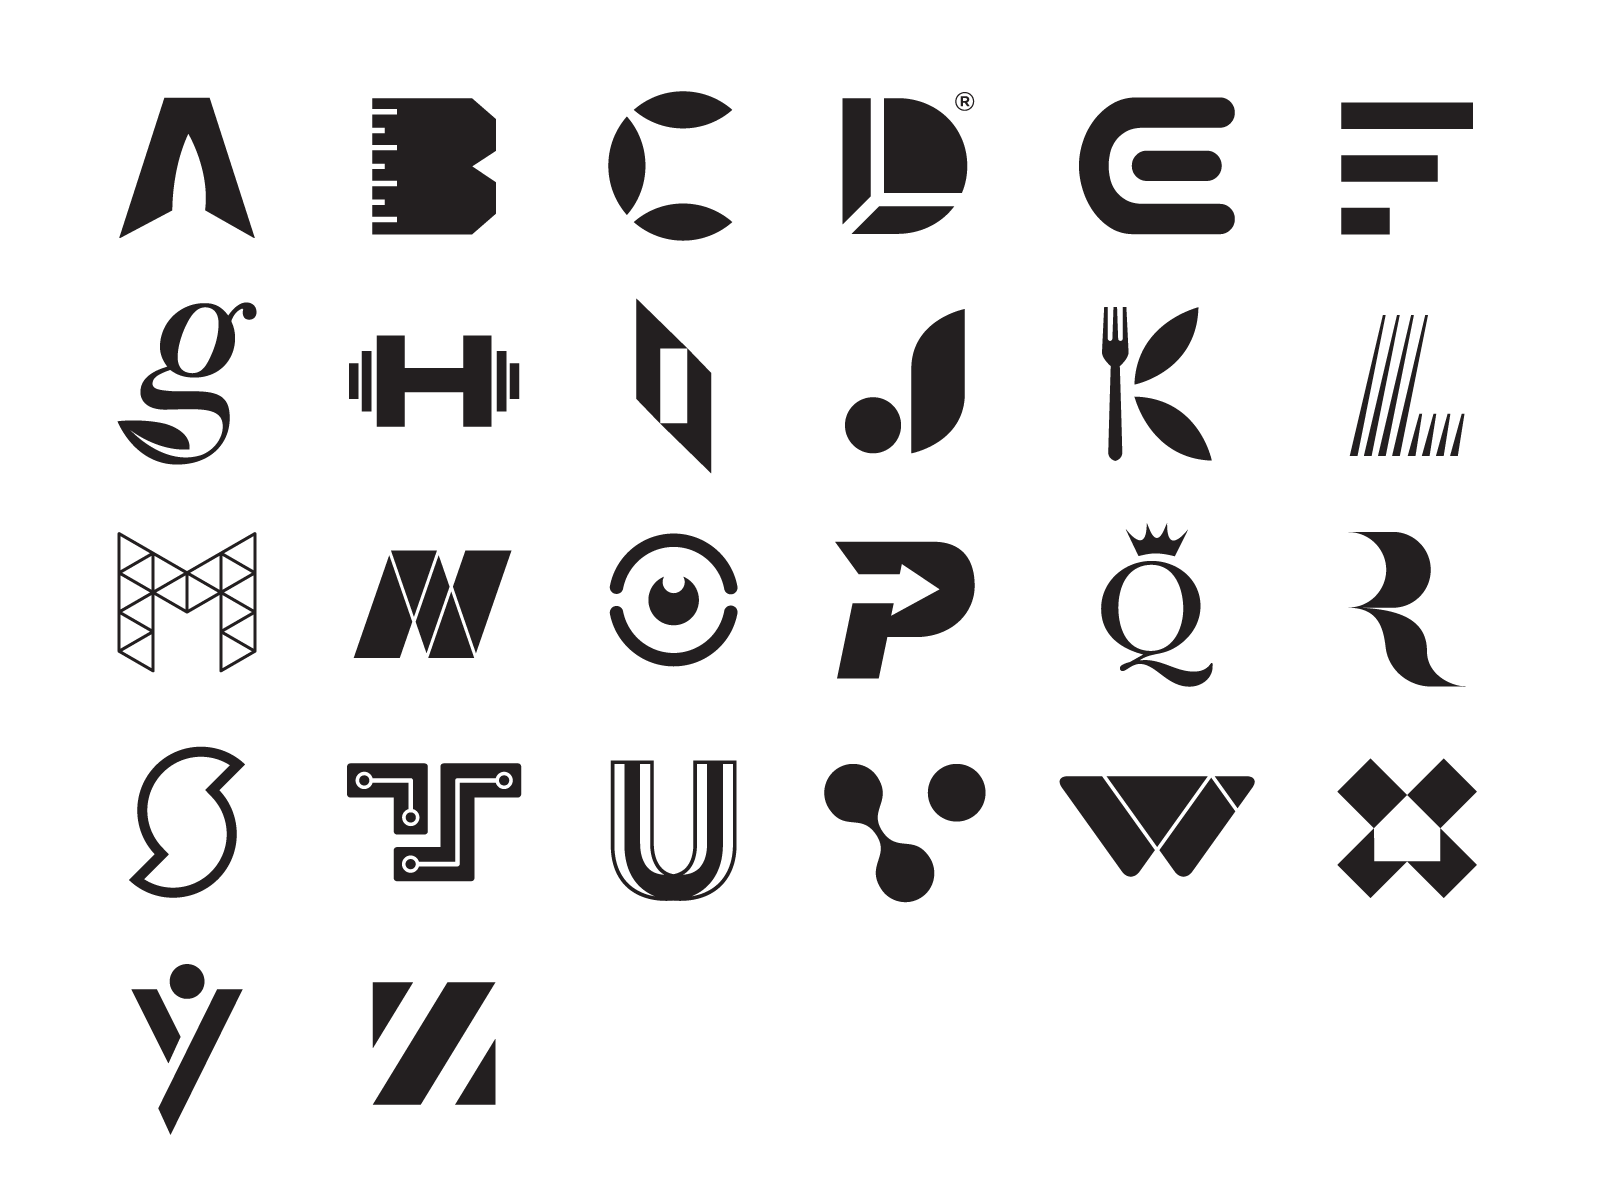 Alphabet Logos In Black By Jacob Cass On Dribbble